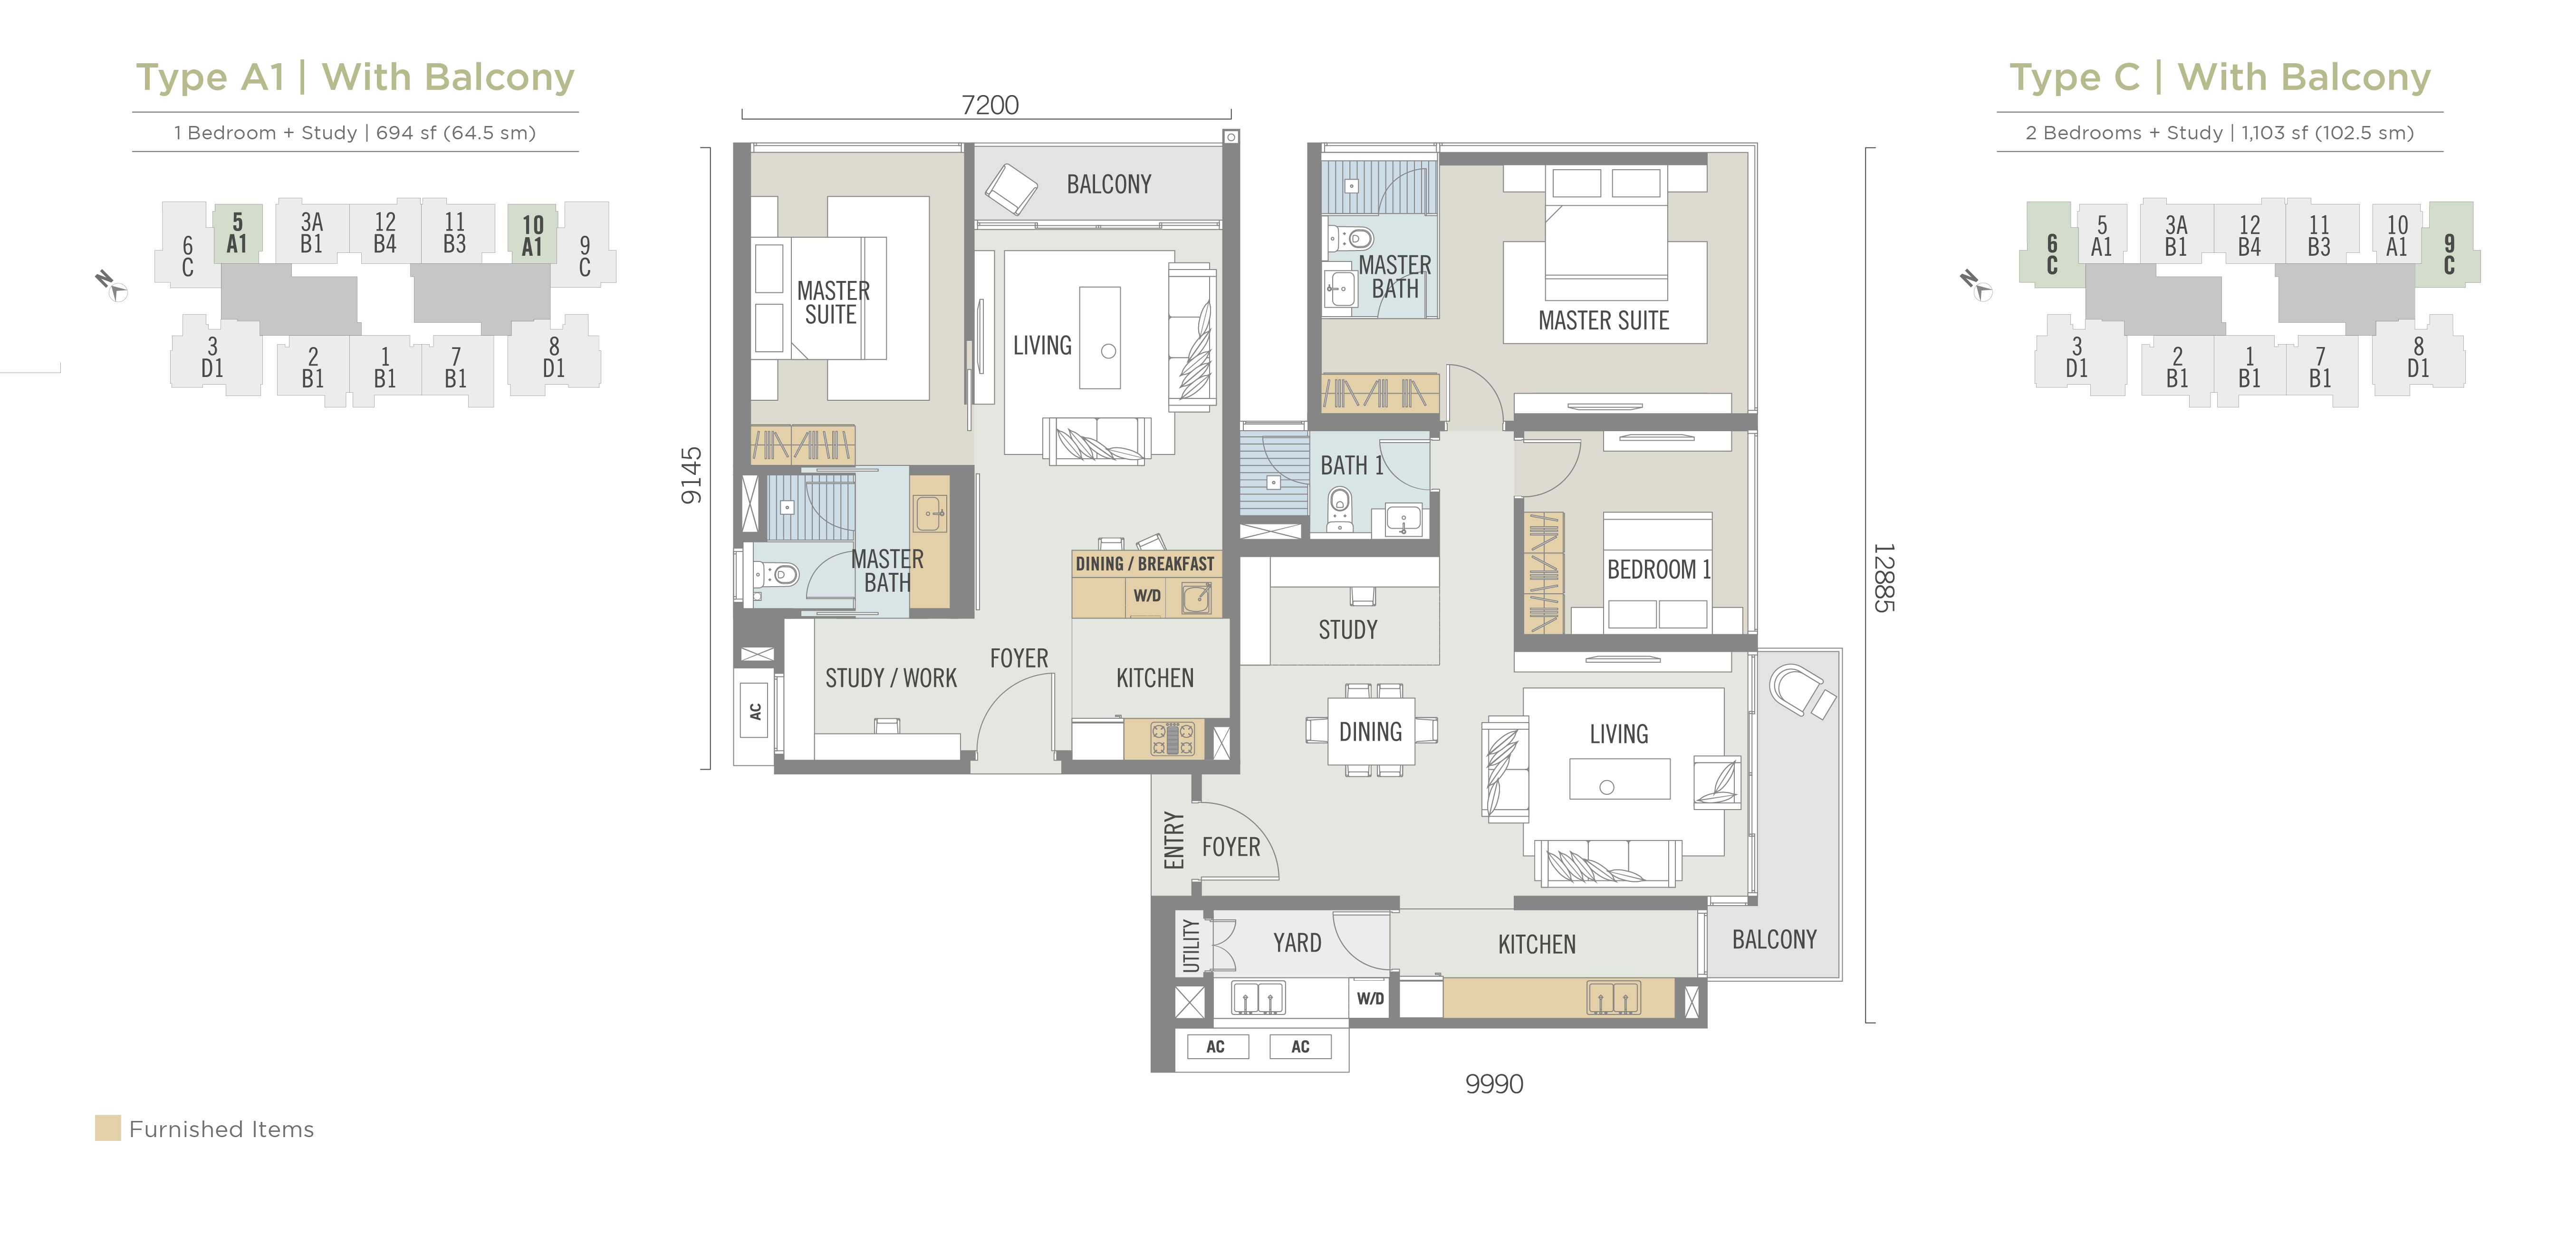 Type A & C |Typical Floor Plans with Dual Key Concept